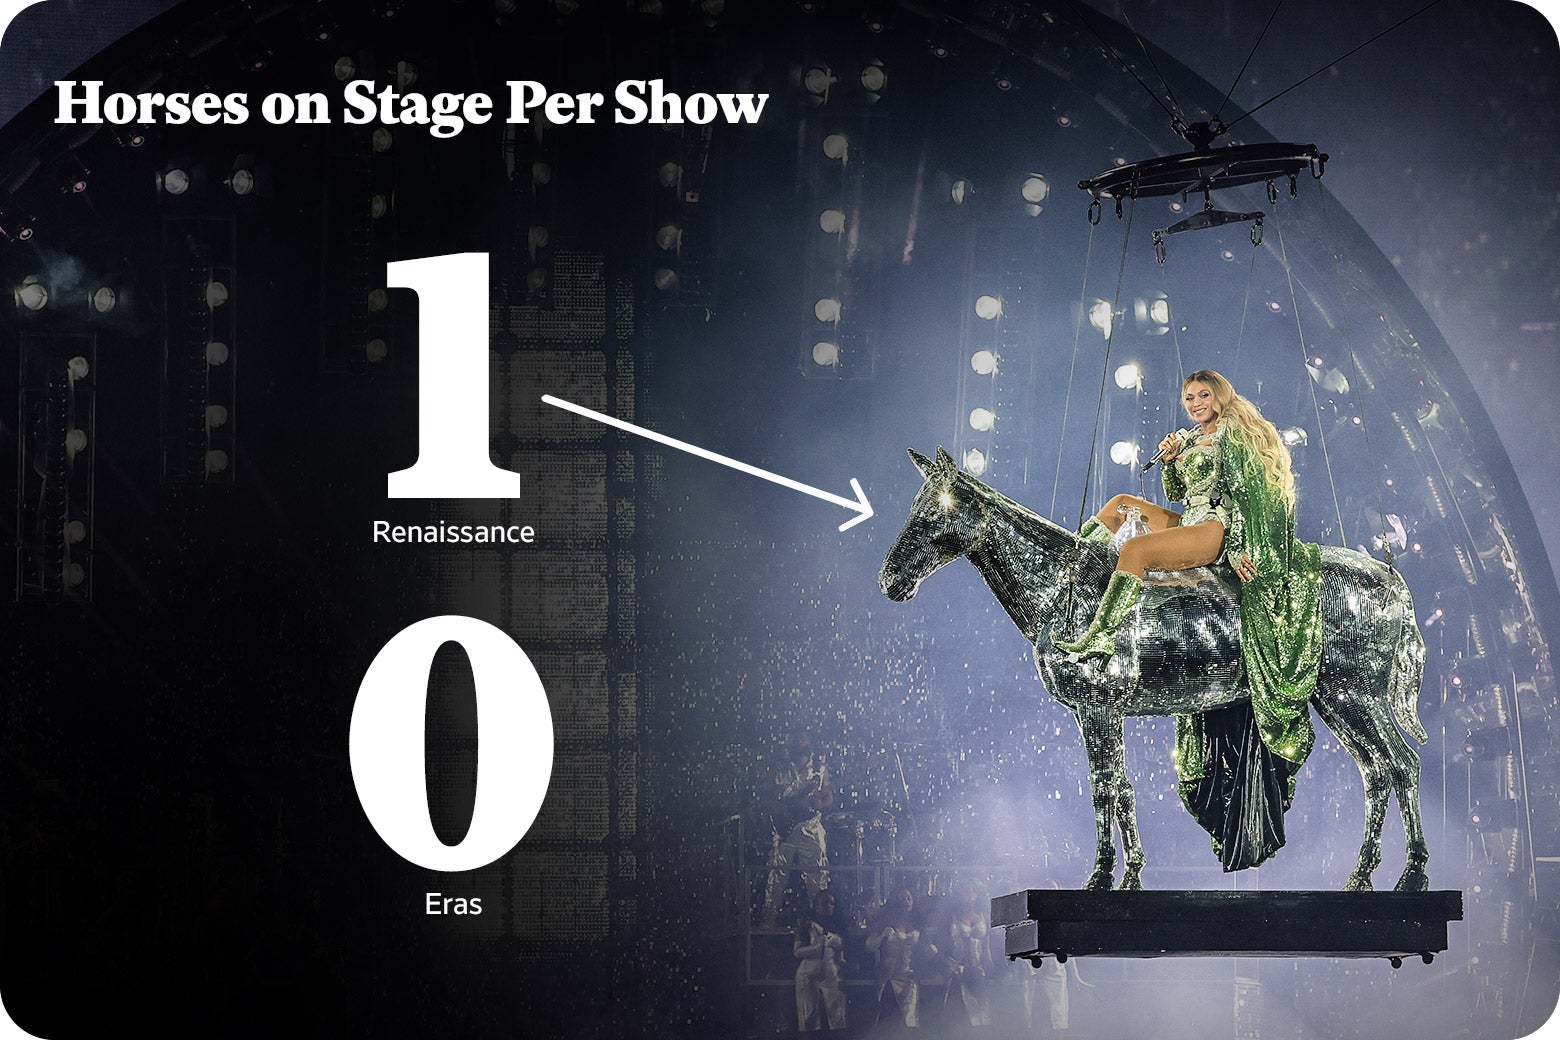 Beyonce sits atop a silver horse suspended above the stage.